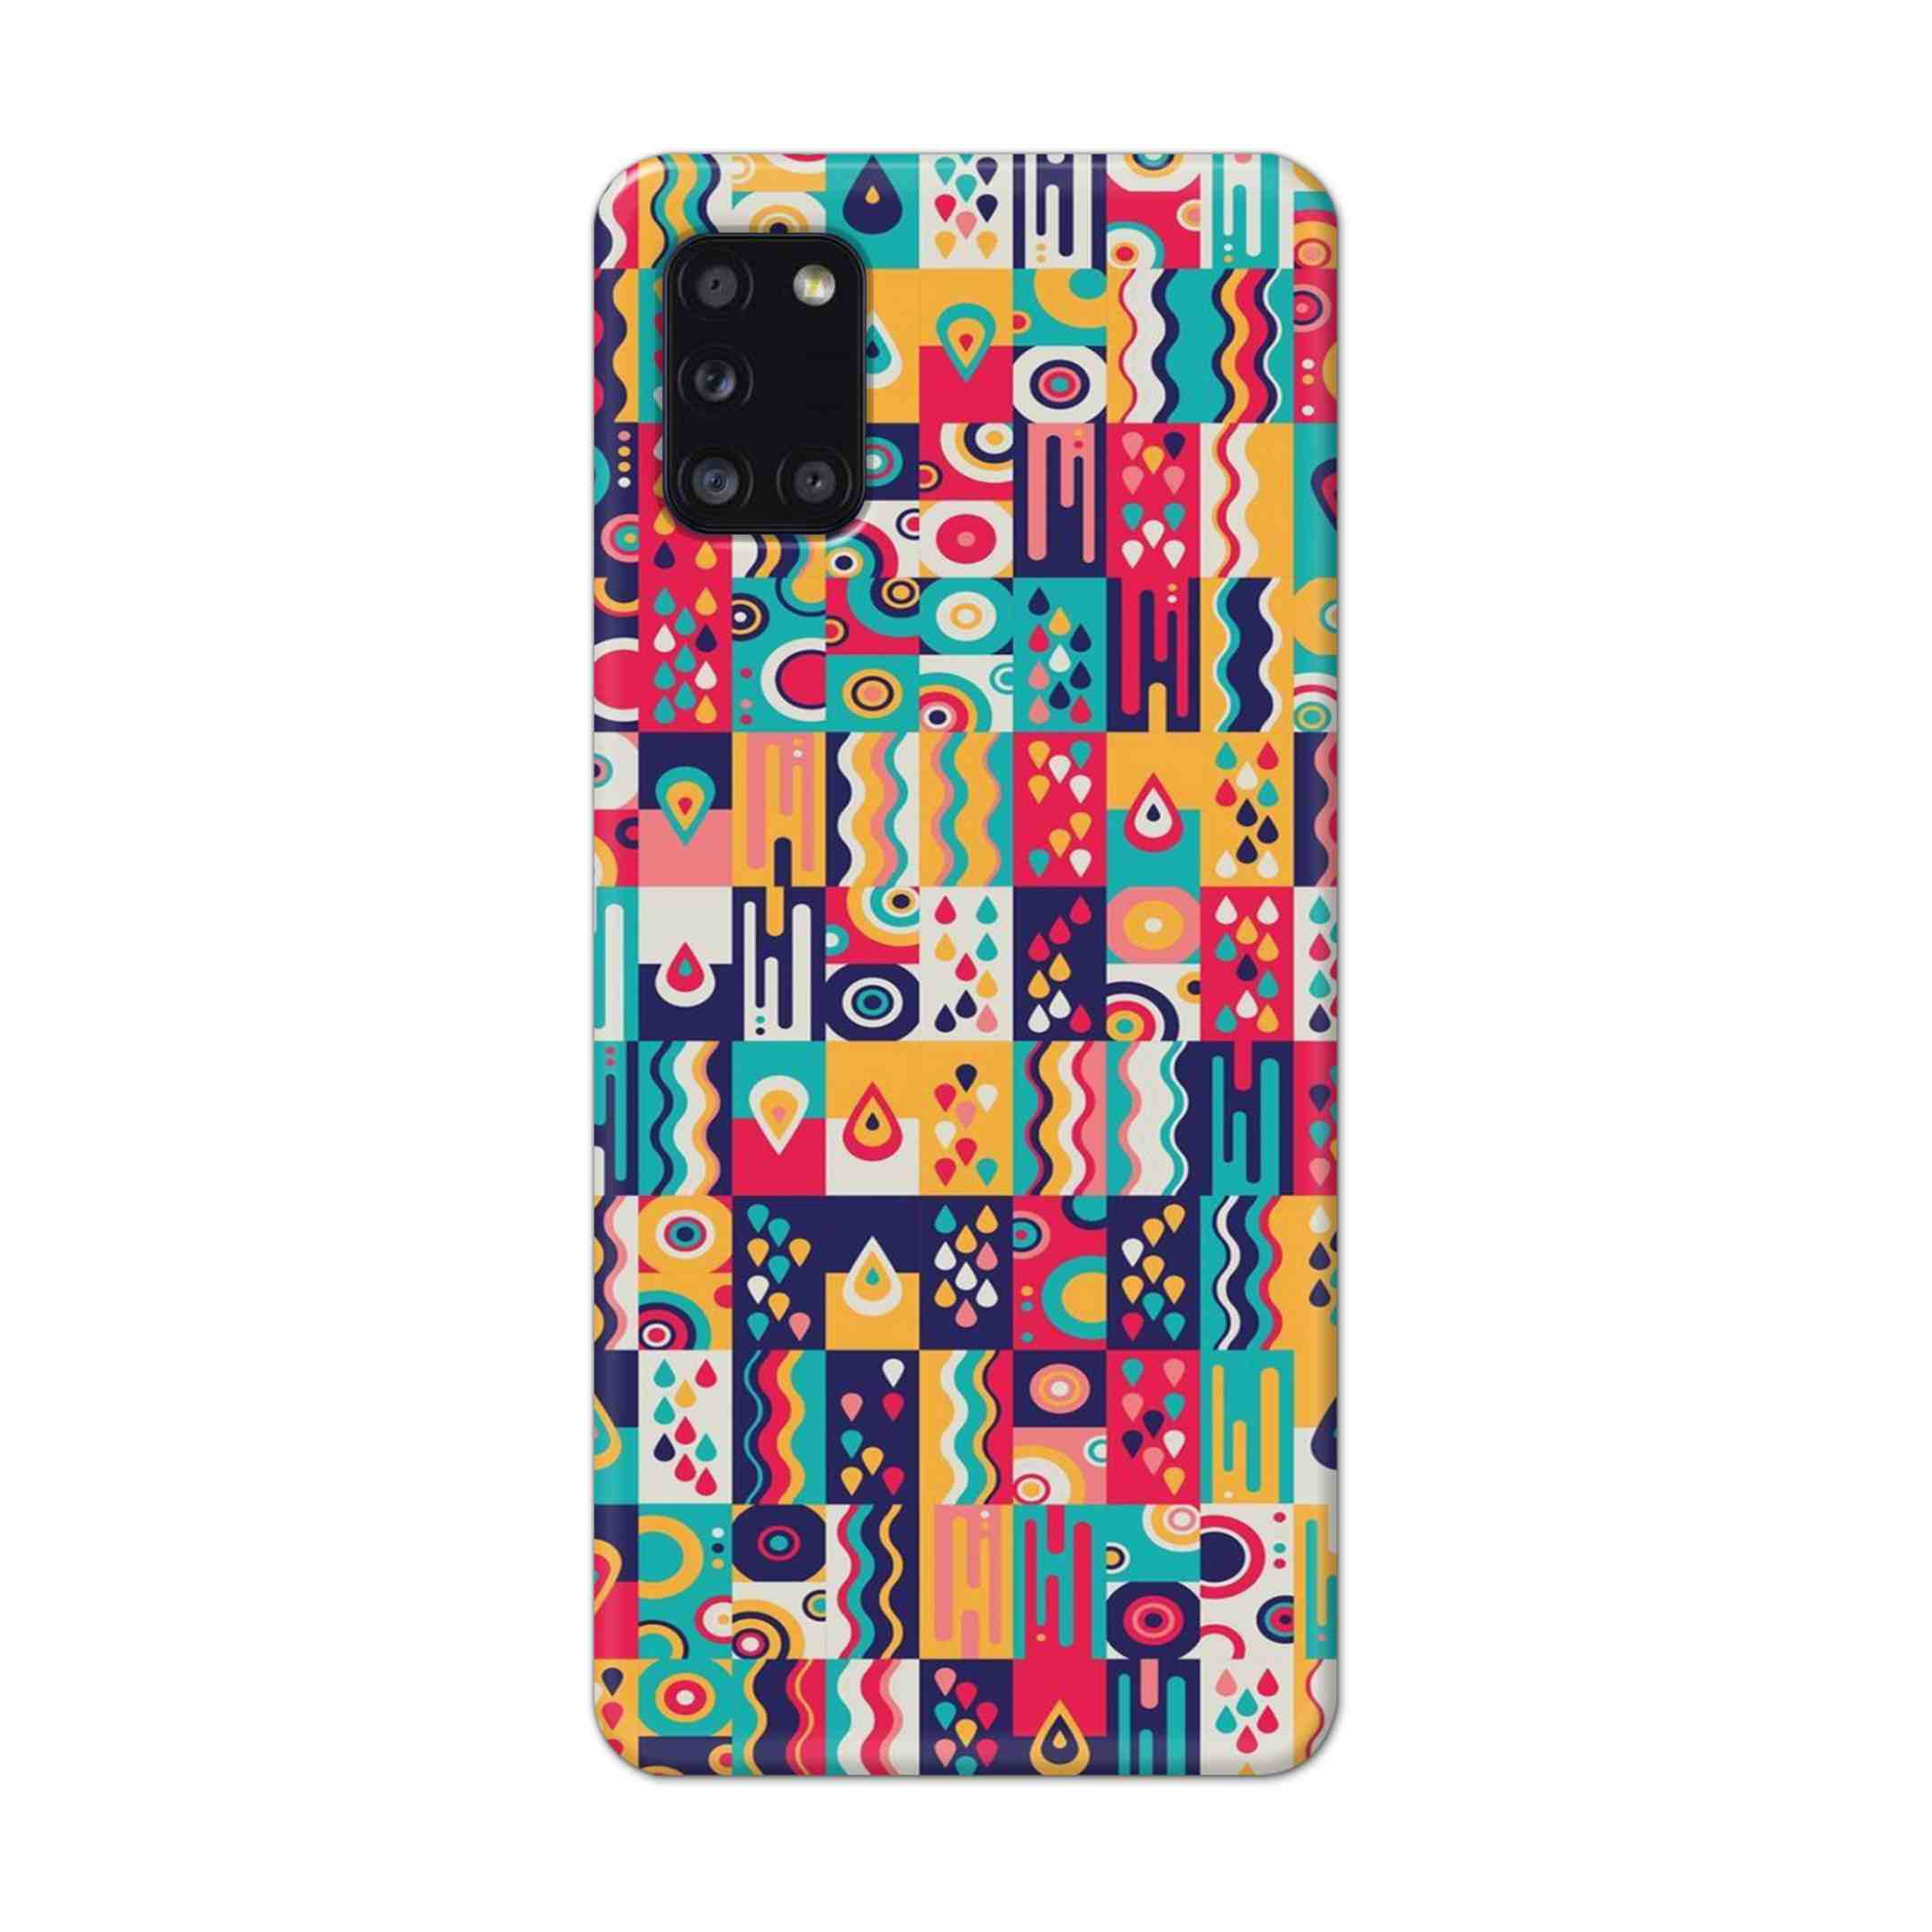 Buy Art Hard Back Mobile Phone Case Cover For Samsung Galaxy A31 Online